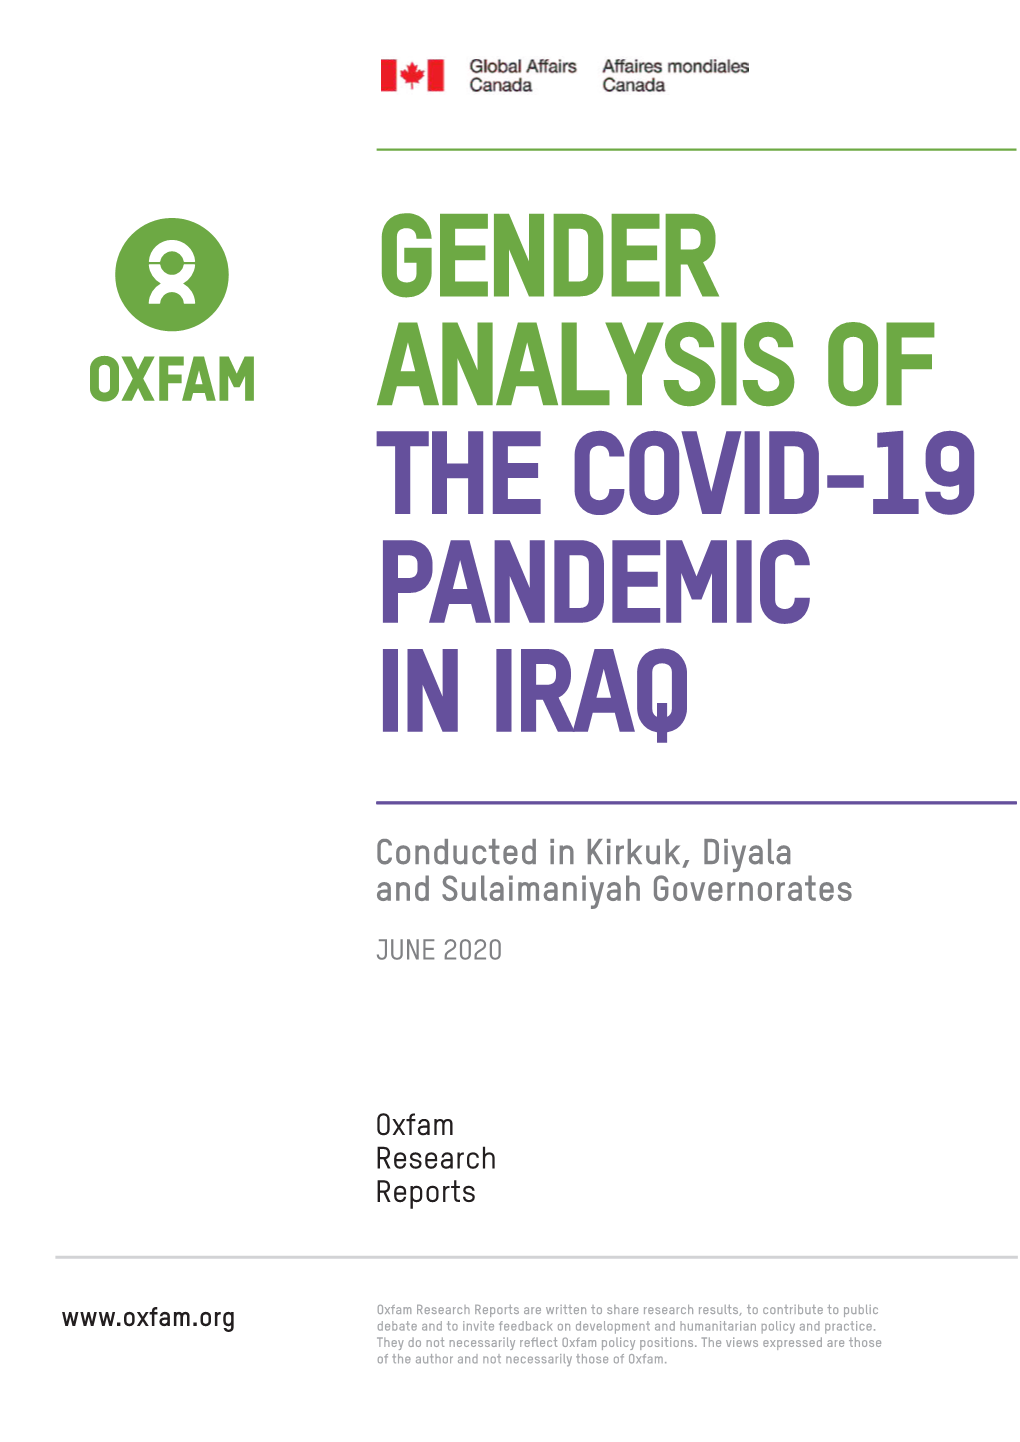 Gender Analysis of the Covid-19 Pandemic in Iraq